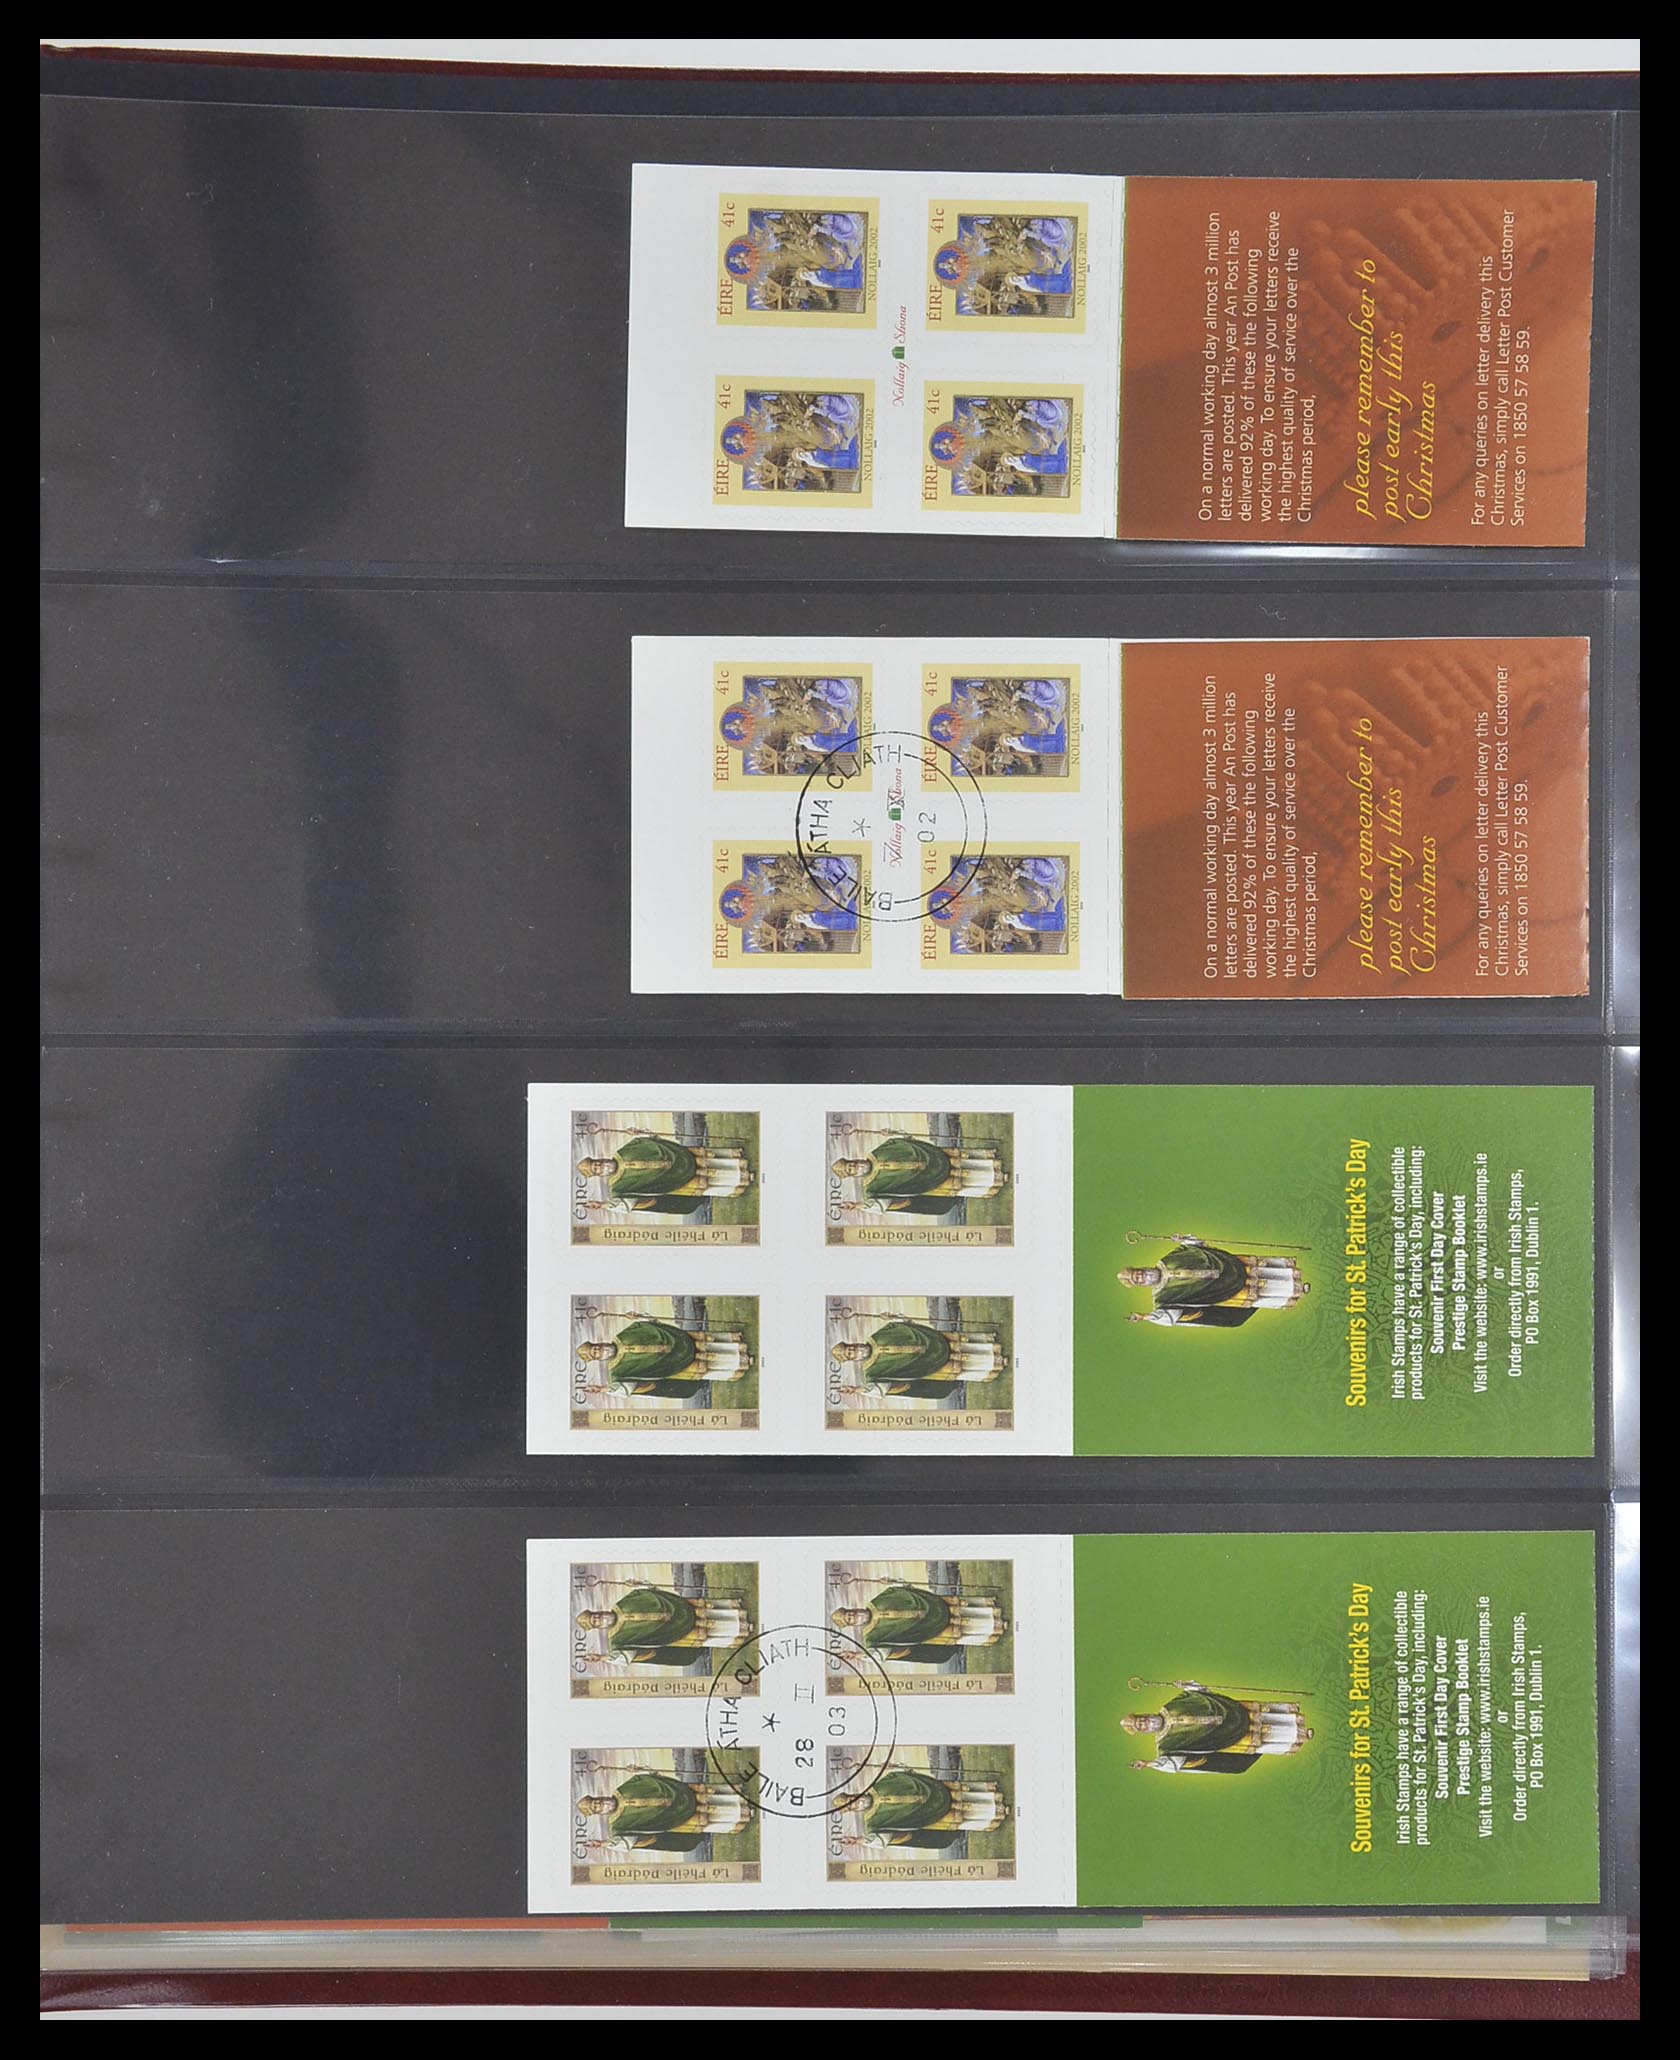 33313 046 - Stamp collection 33313 Ireland stamp booklets 1974-2004.